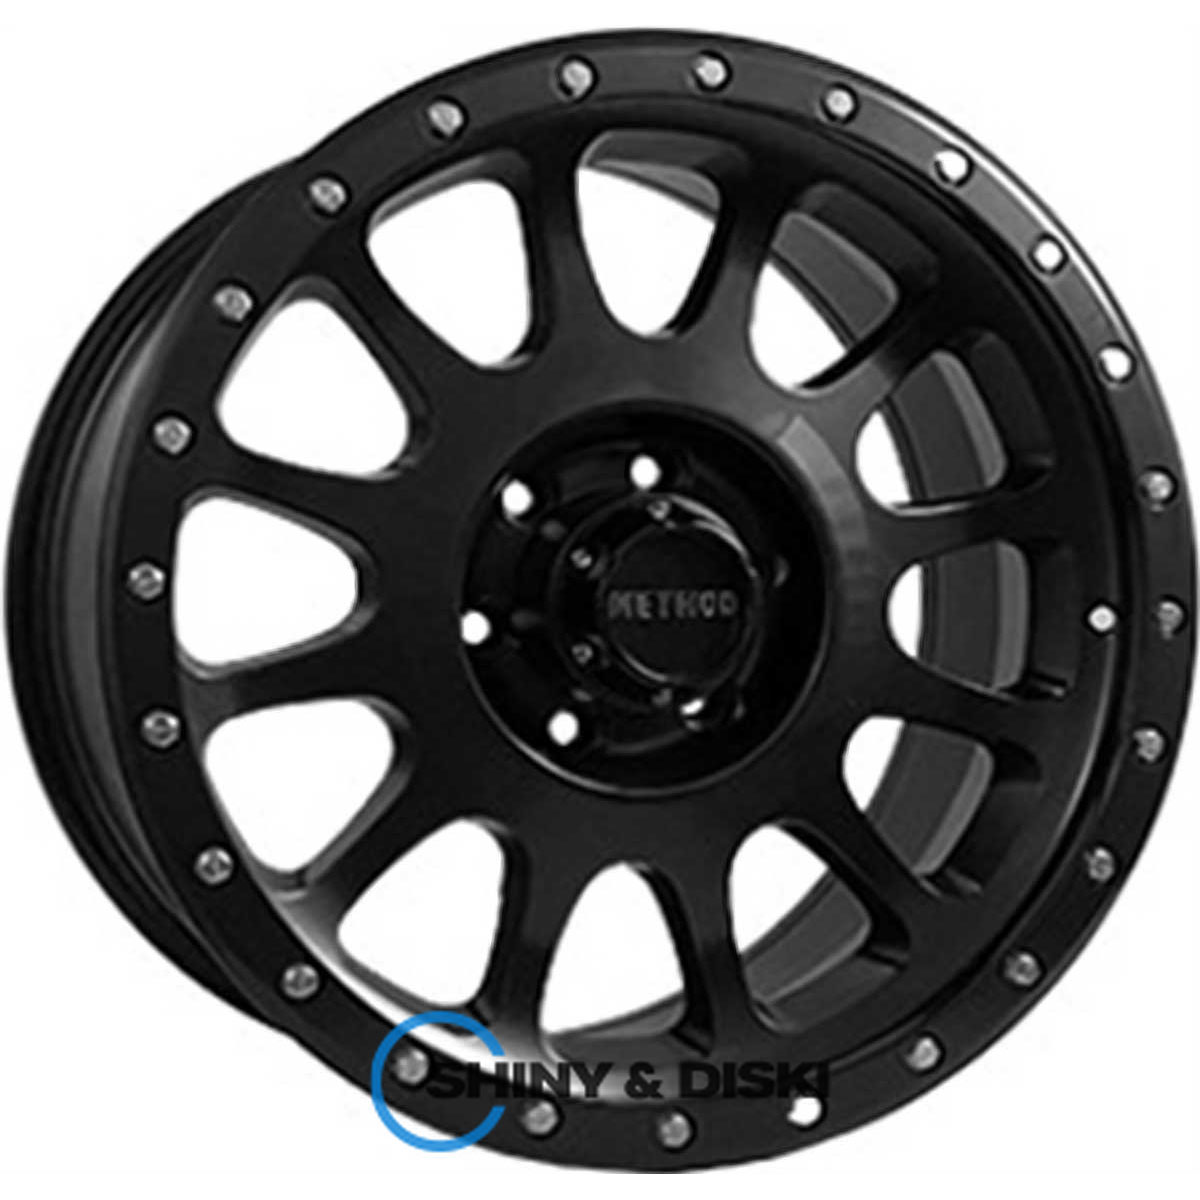 off road wheels ow9095 mb